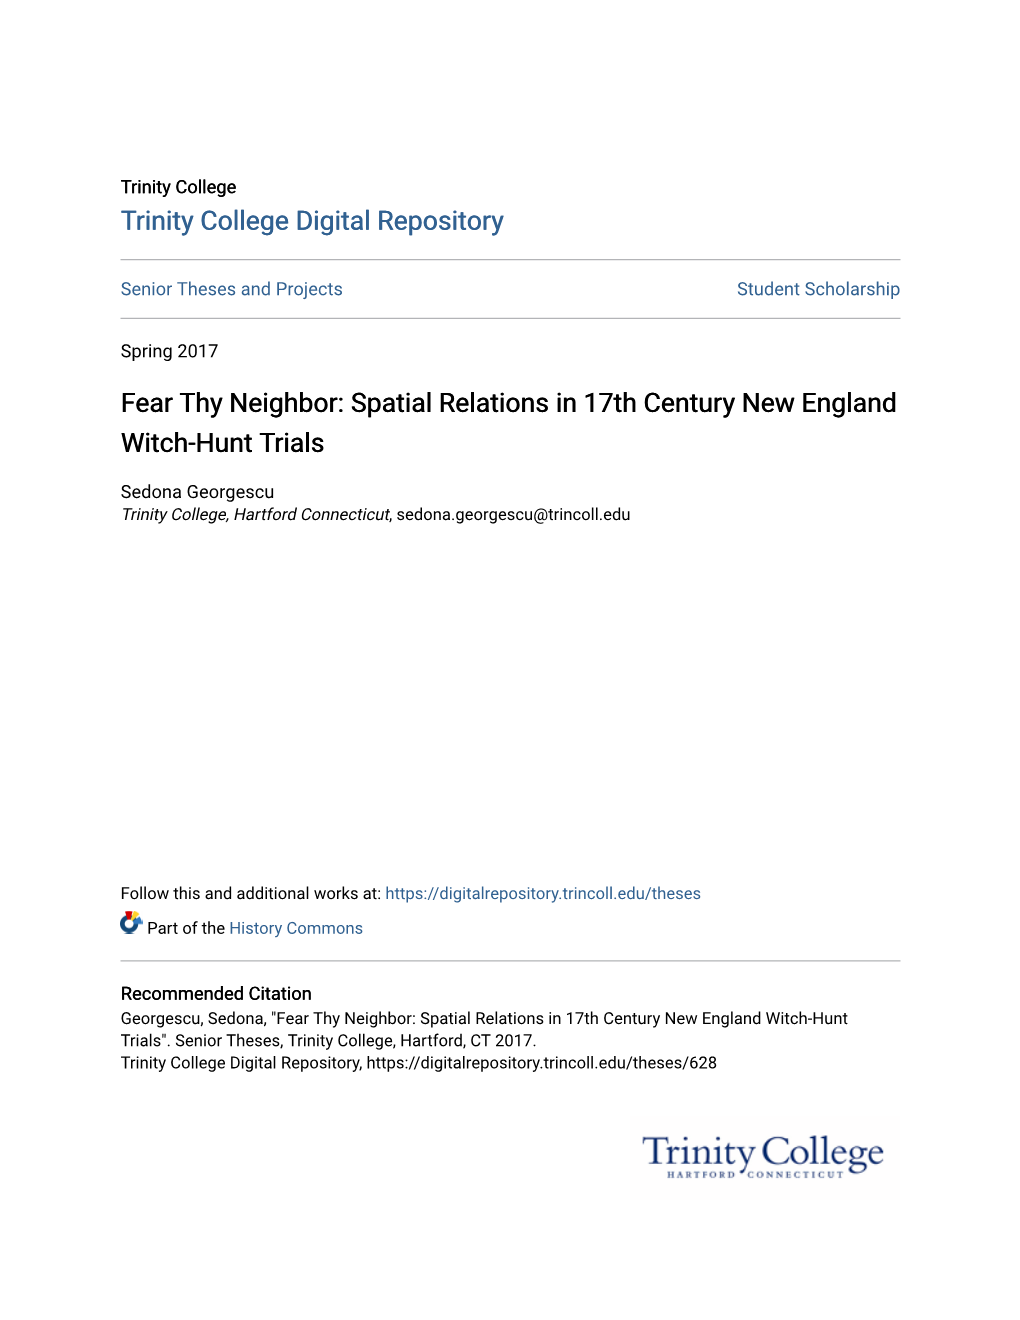 Spatial Relations in 17Th Century New England Witch-Hunt Trials